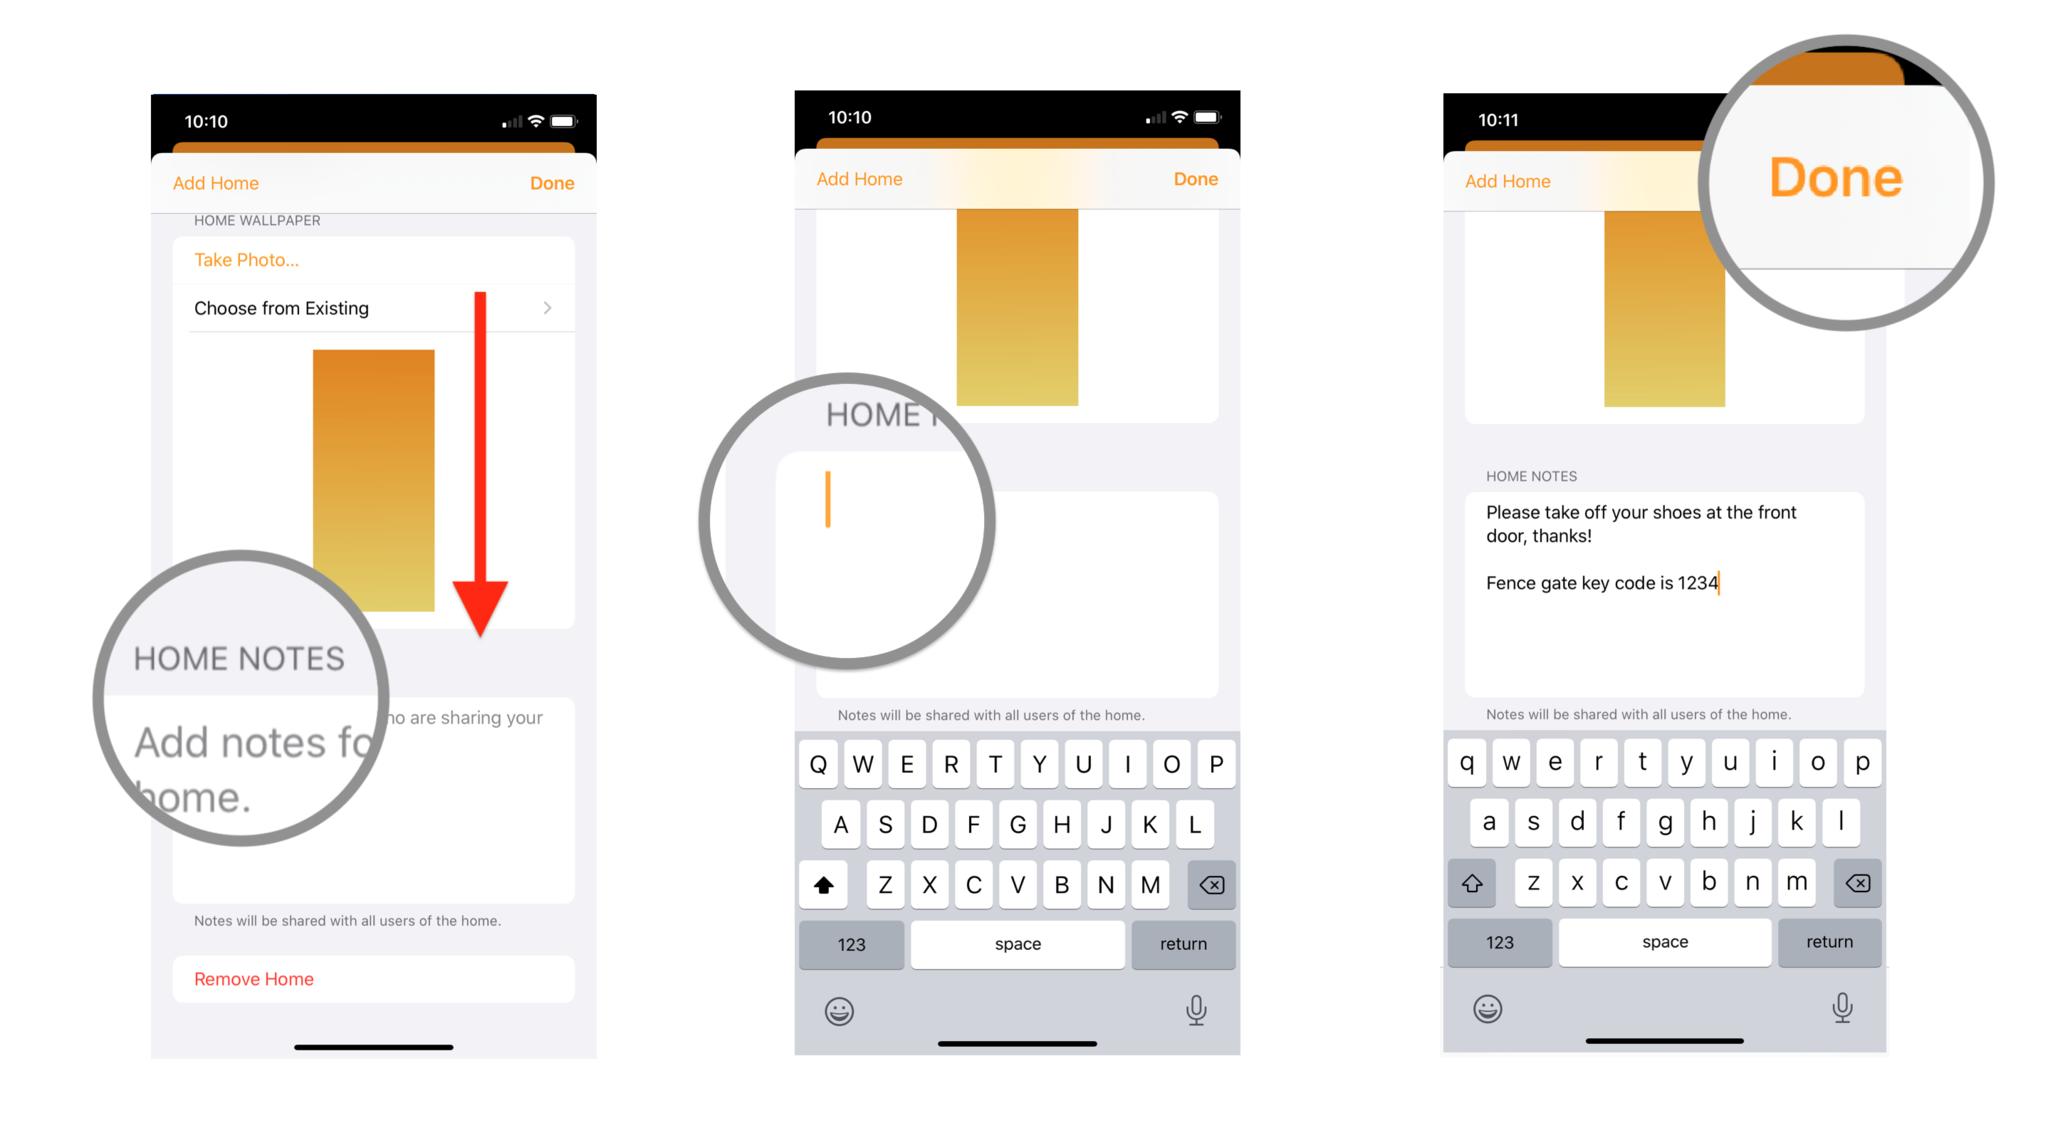 Steps 4-6 depicting how to add notes in the iOS Home app